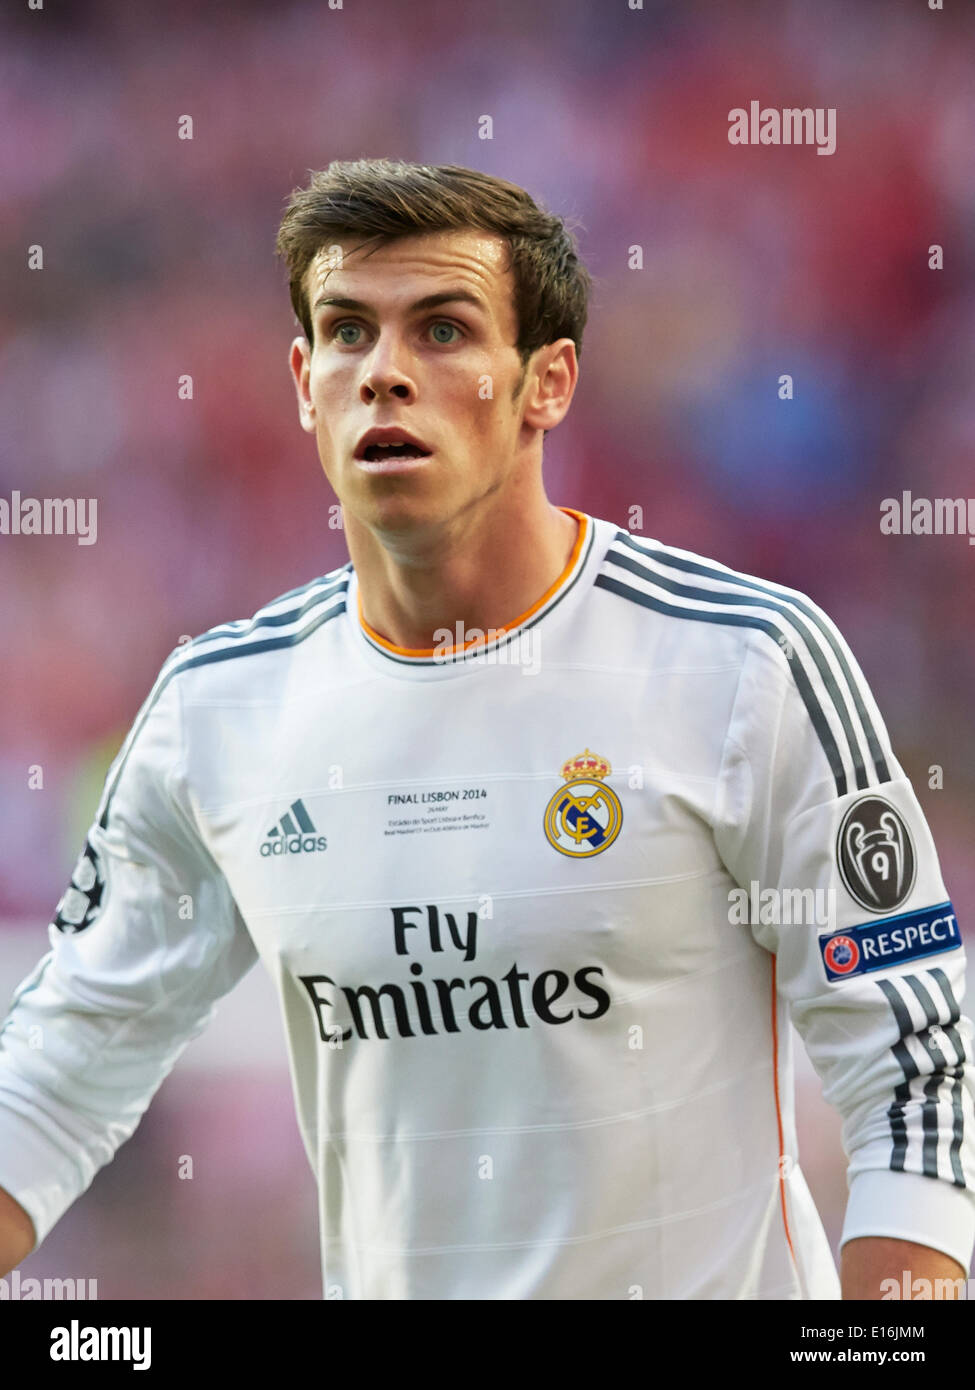 24.05.2014, Lisbon, Portugal. Midfielder Gareth Bale of Real Madrid looks  on during the UEFA Champions League final game between Real Madrid and  Atletico Madrid at Sport Lisboa e Benfica Stadium, Lisbon, Portugal